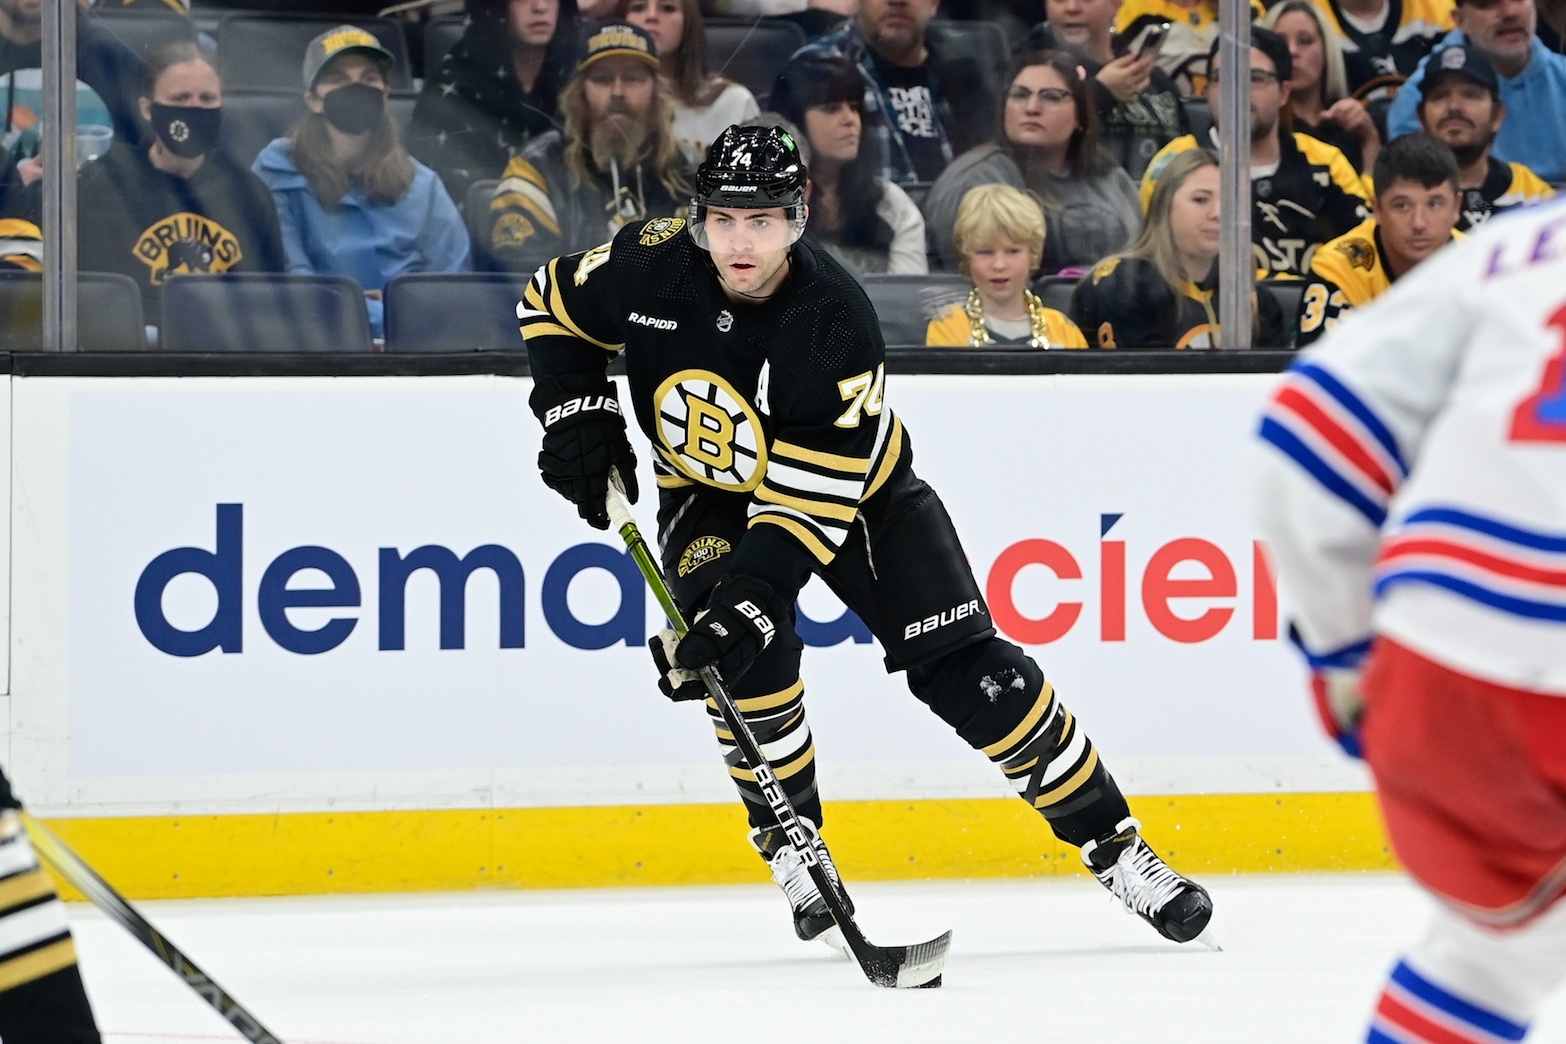 Sep 24, 2023; Boston, Massachusetts, USA; Boston Bruins left wing Jake DeBrusk (74) against the New York Rangers during the first period at TD Garden. Mandatory Credit: Eric Canha-USA TODAY Sports